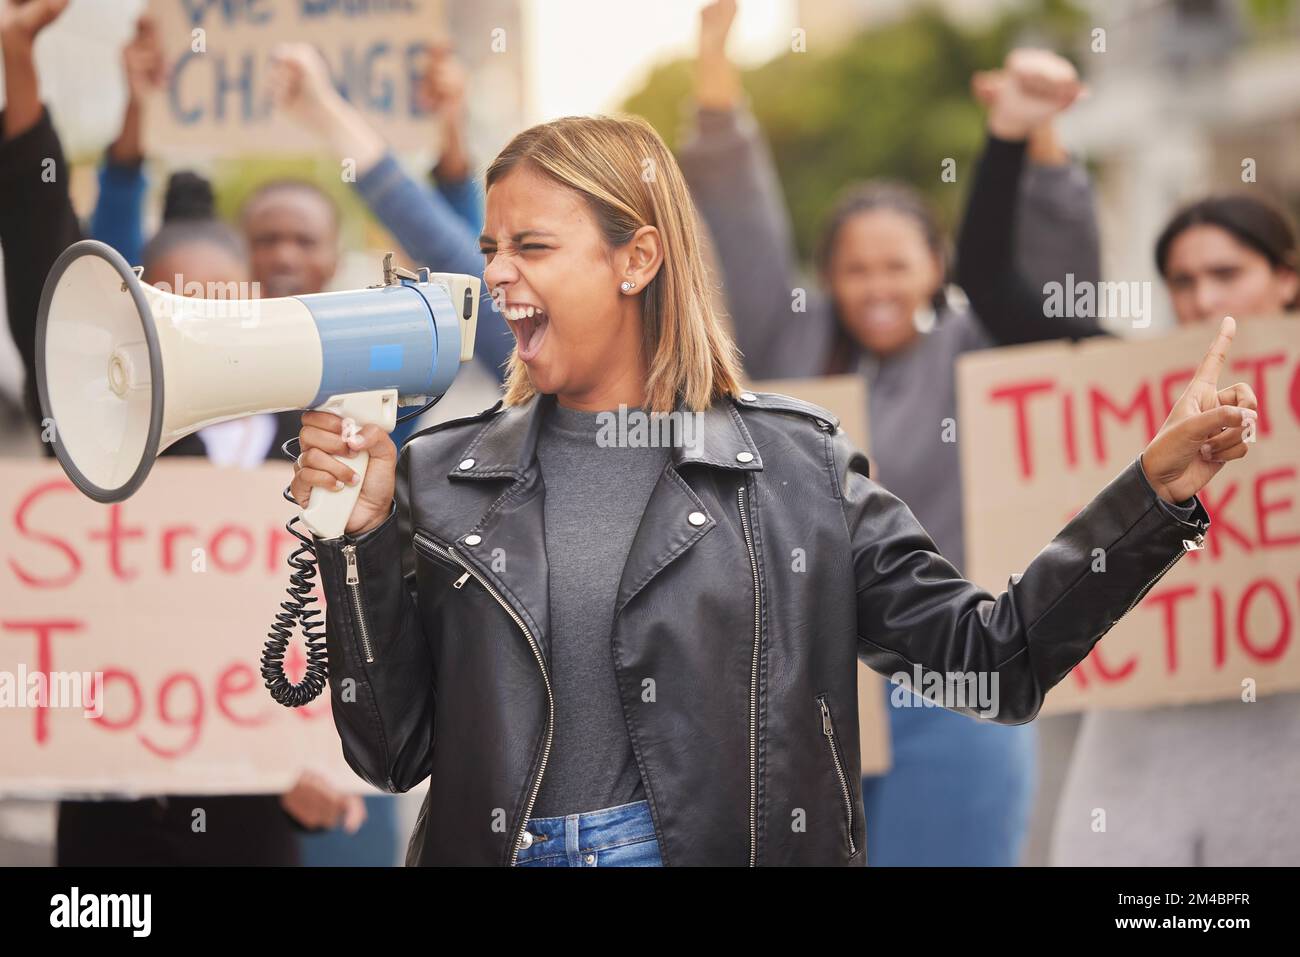 Protest, demonstration and woman with megaphone in city shouting for justice, freedom and equality. Free speech, human rights and crowd of people Stock Photo